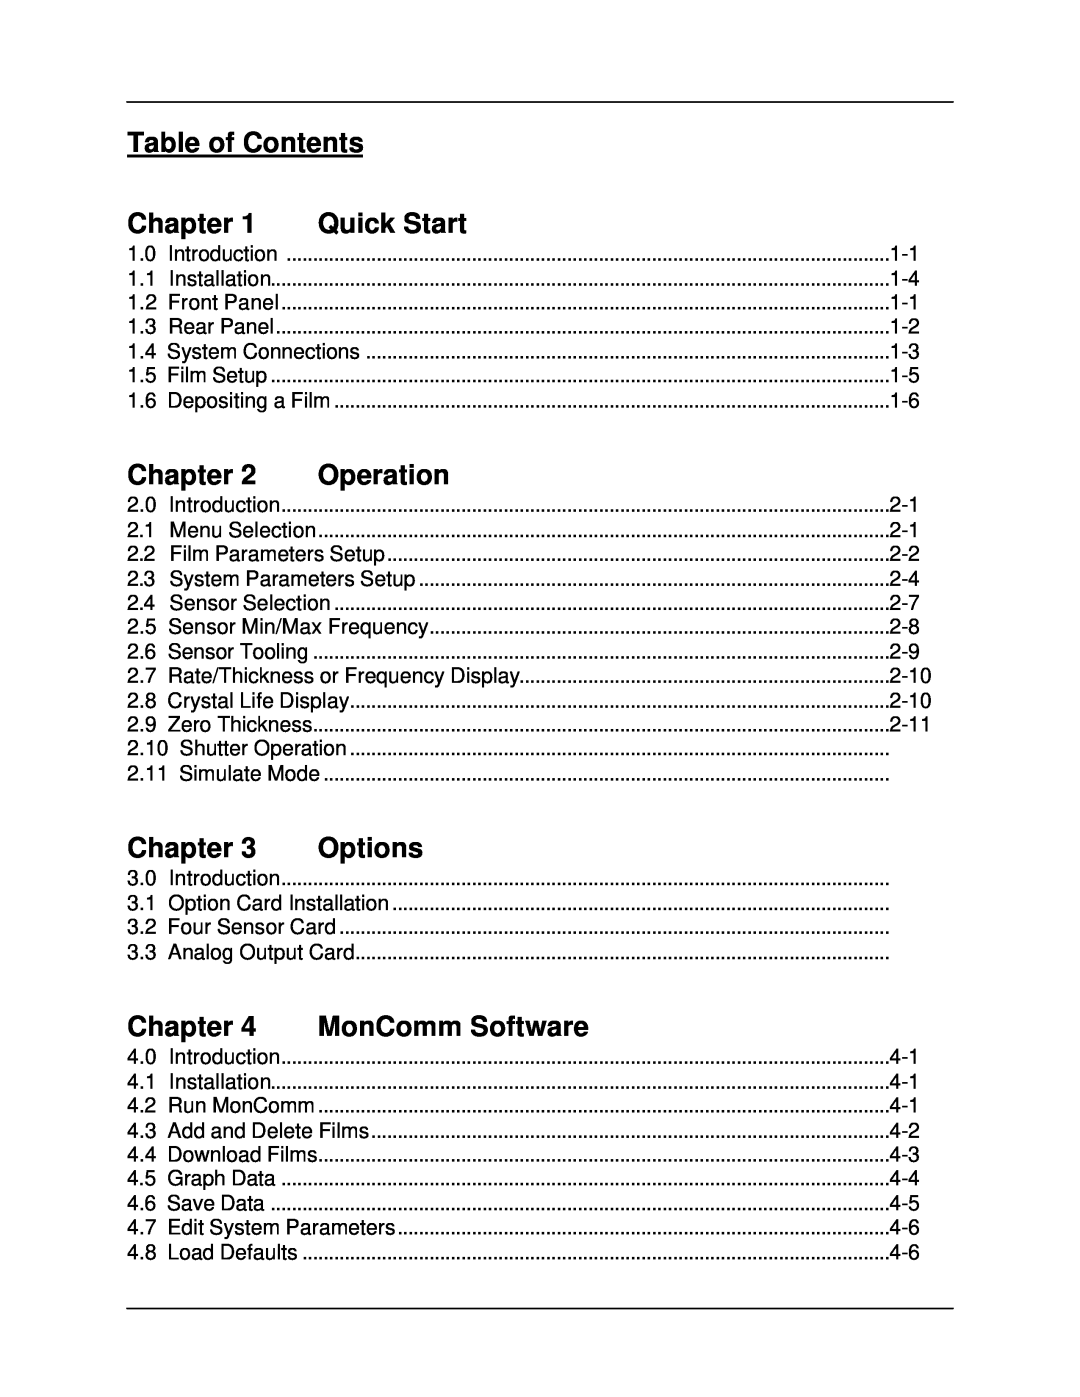 Sigma SQM-160 manual Table of Contents, Chapter, Quick Start, Operation, Options, MonComm Software 